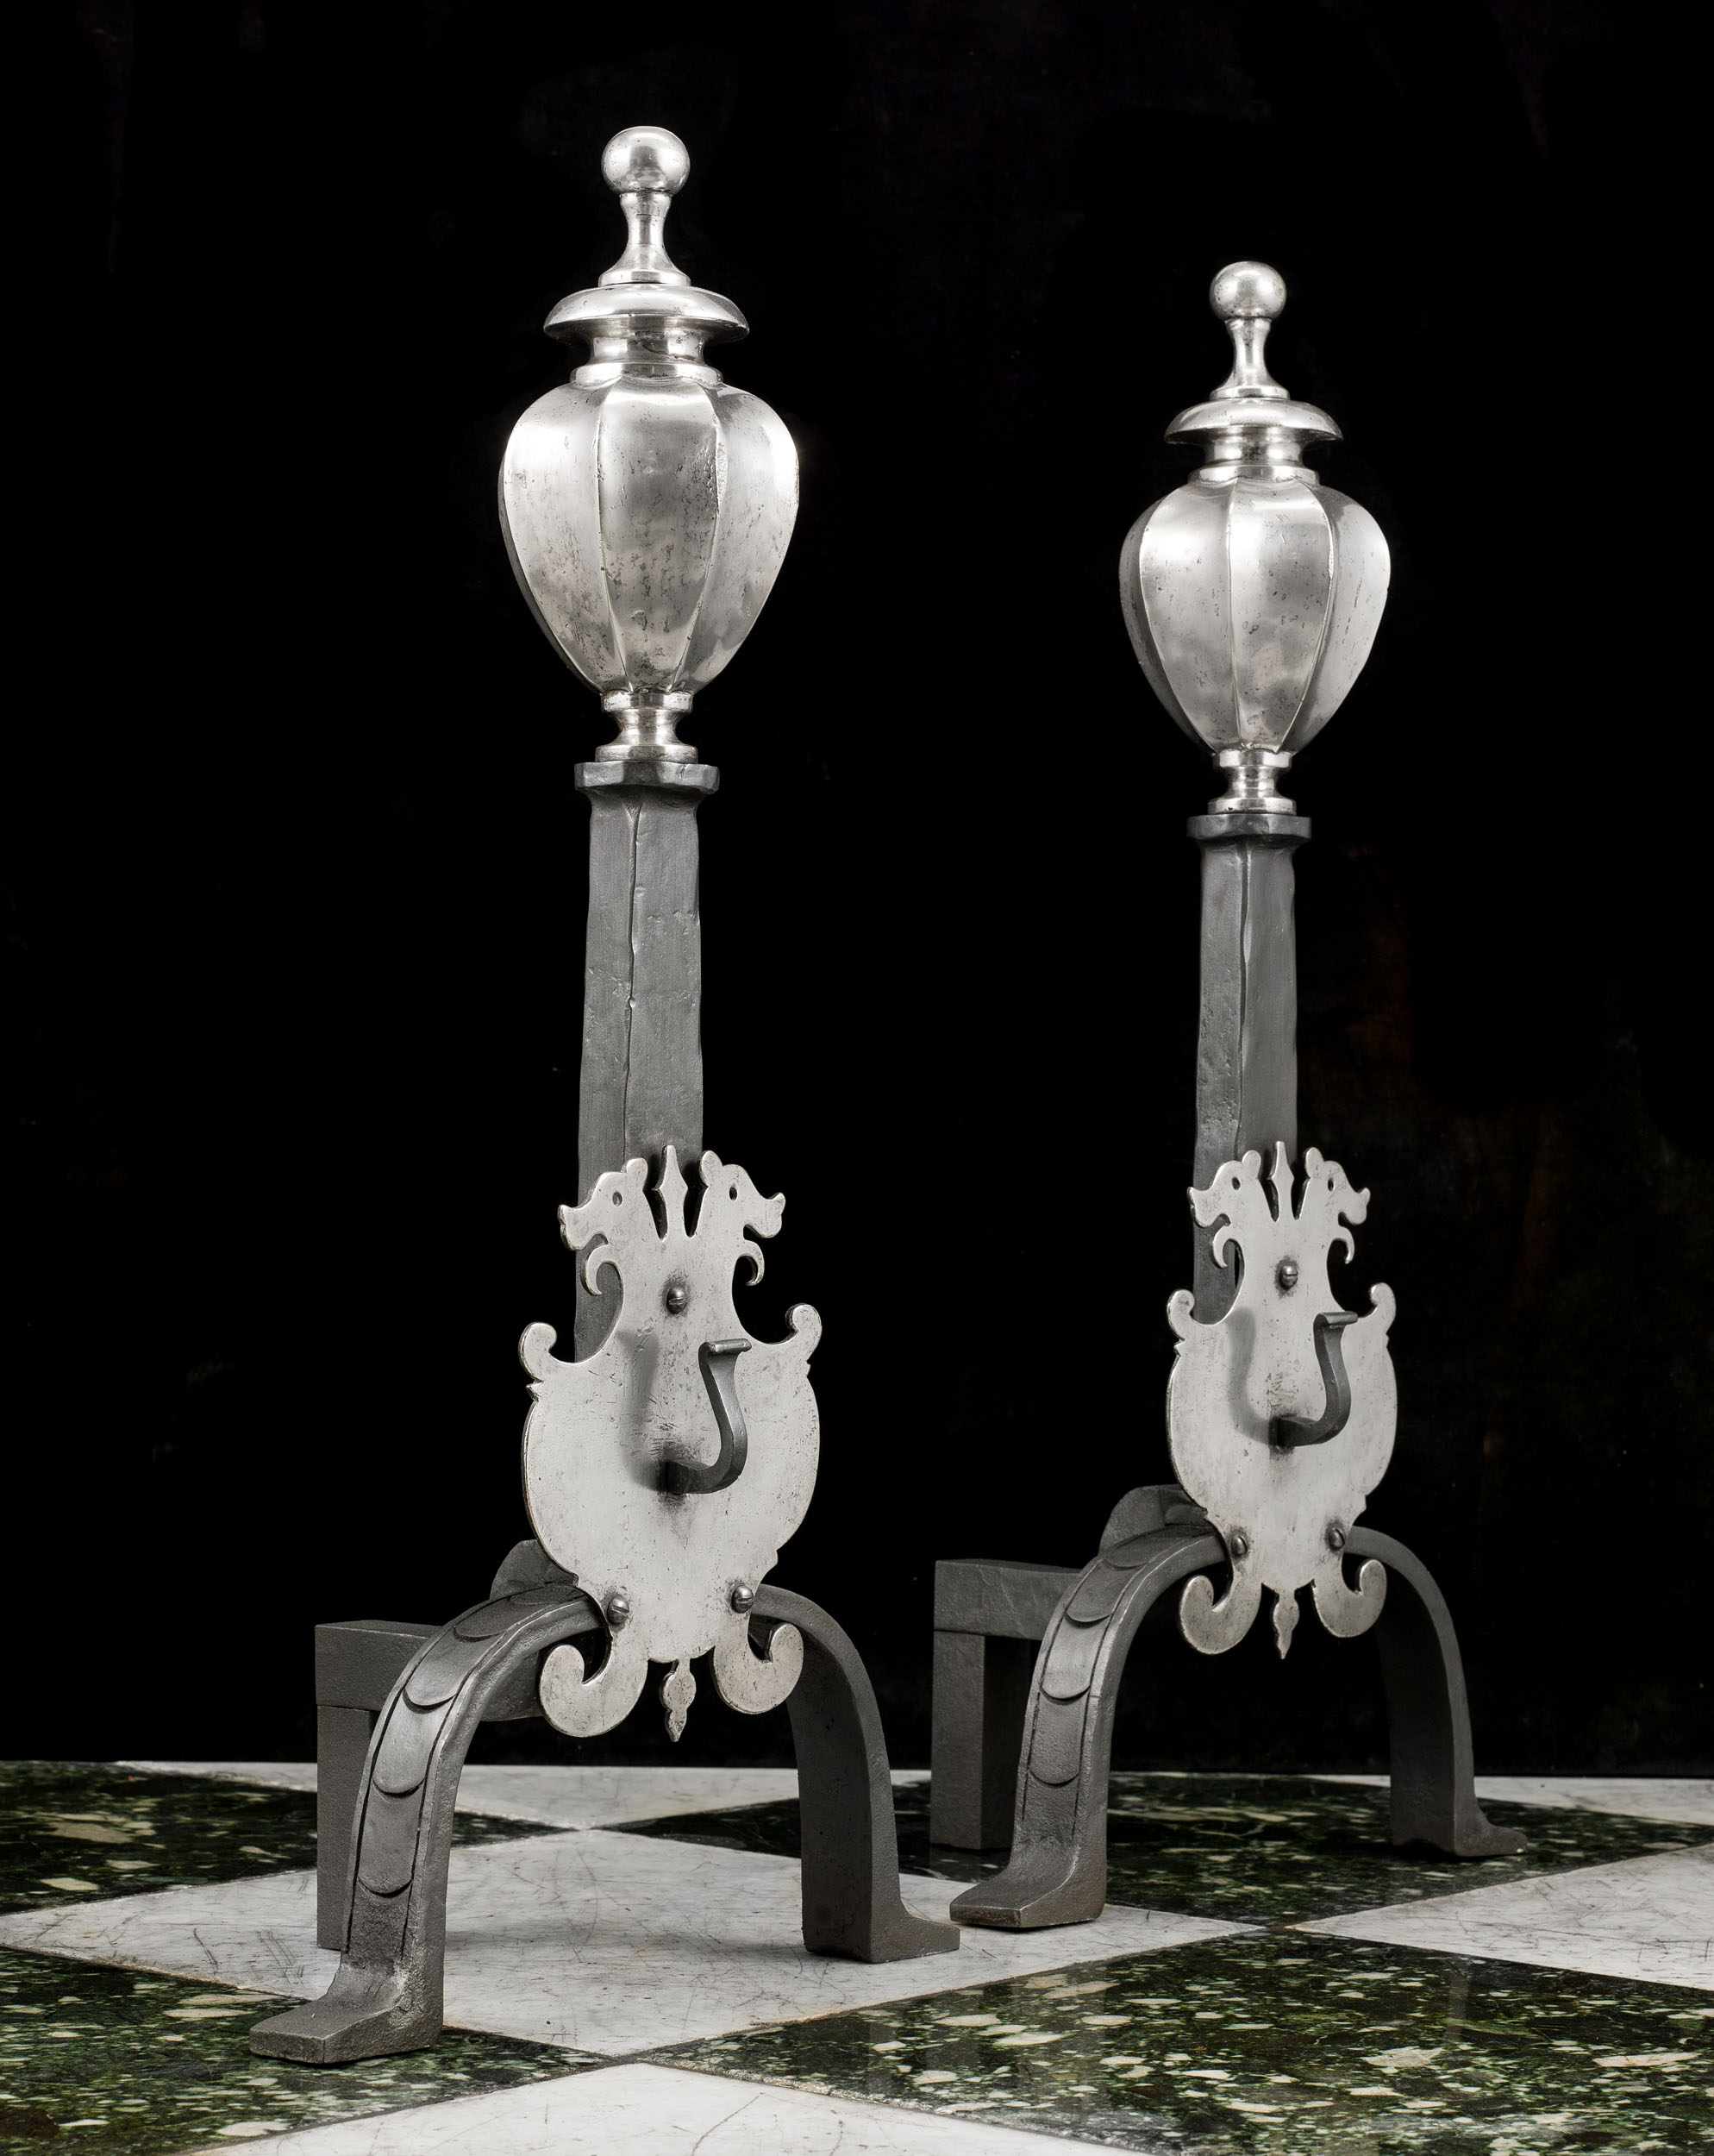 A Pair of Silver Plated 18th century Andirons